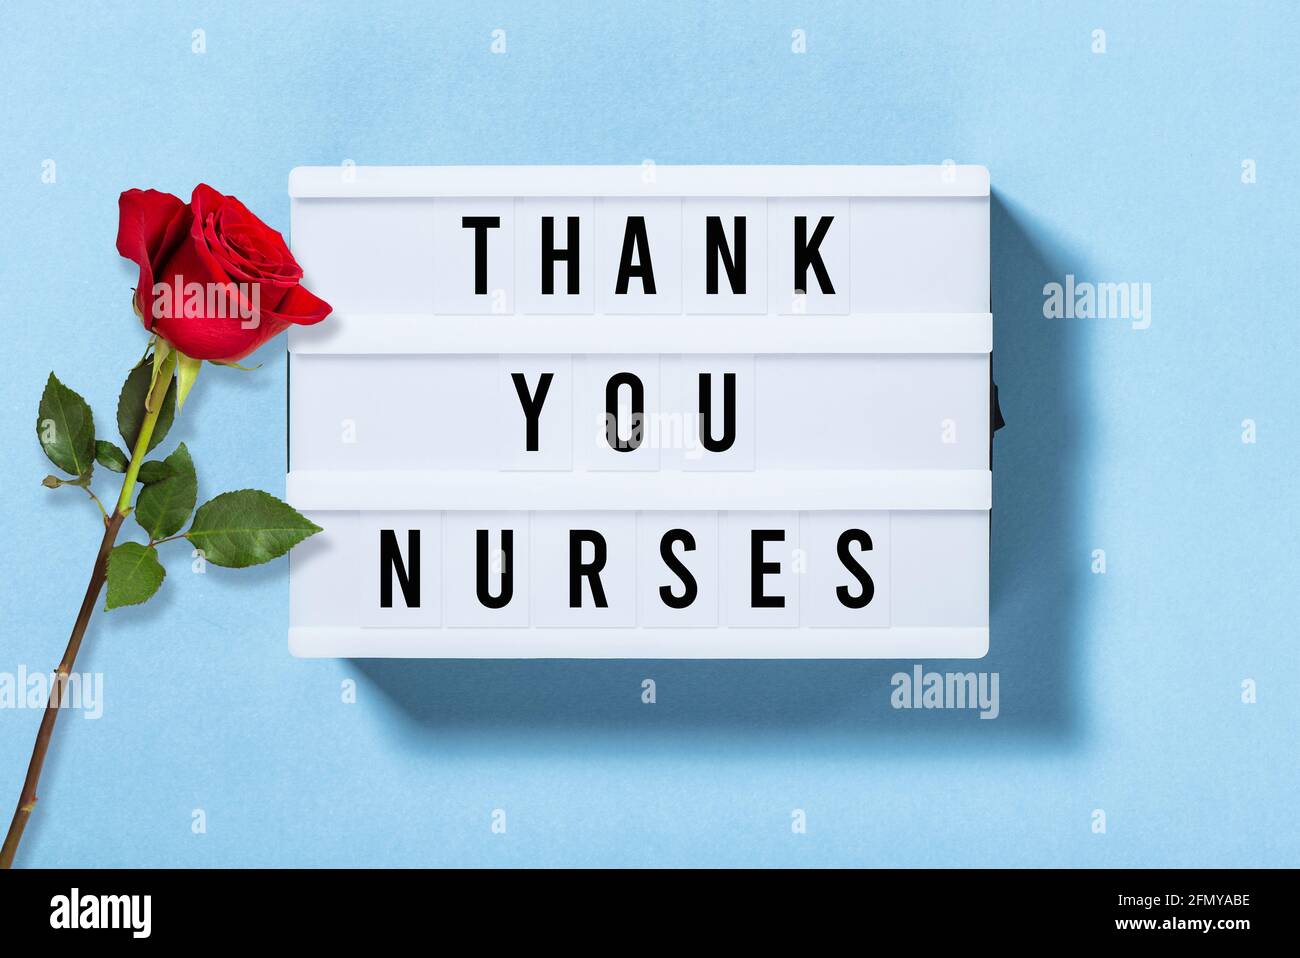 Thank You Nurses. Light box for Nurses Day with red rose flower Stock Photo